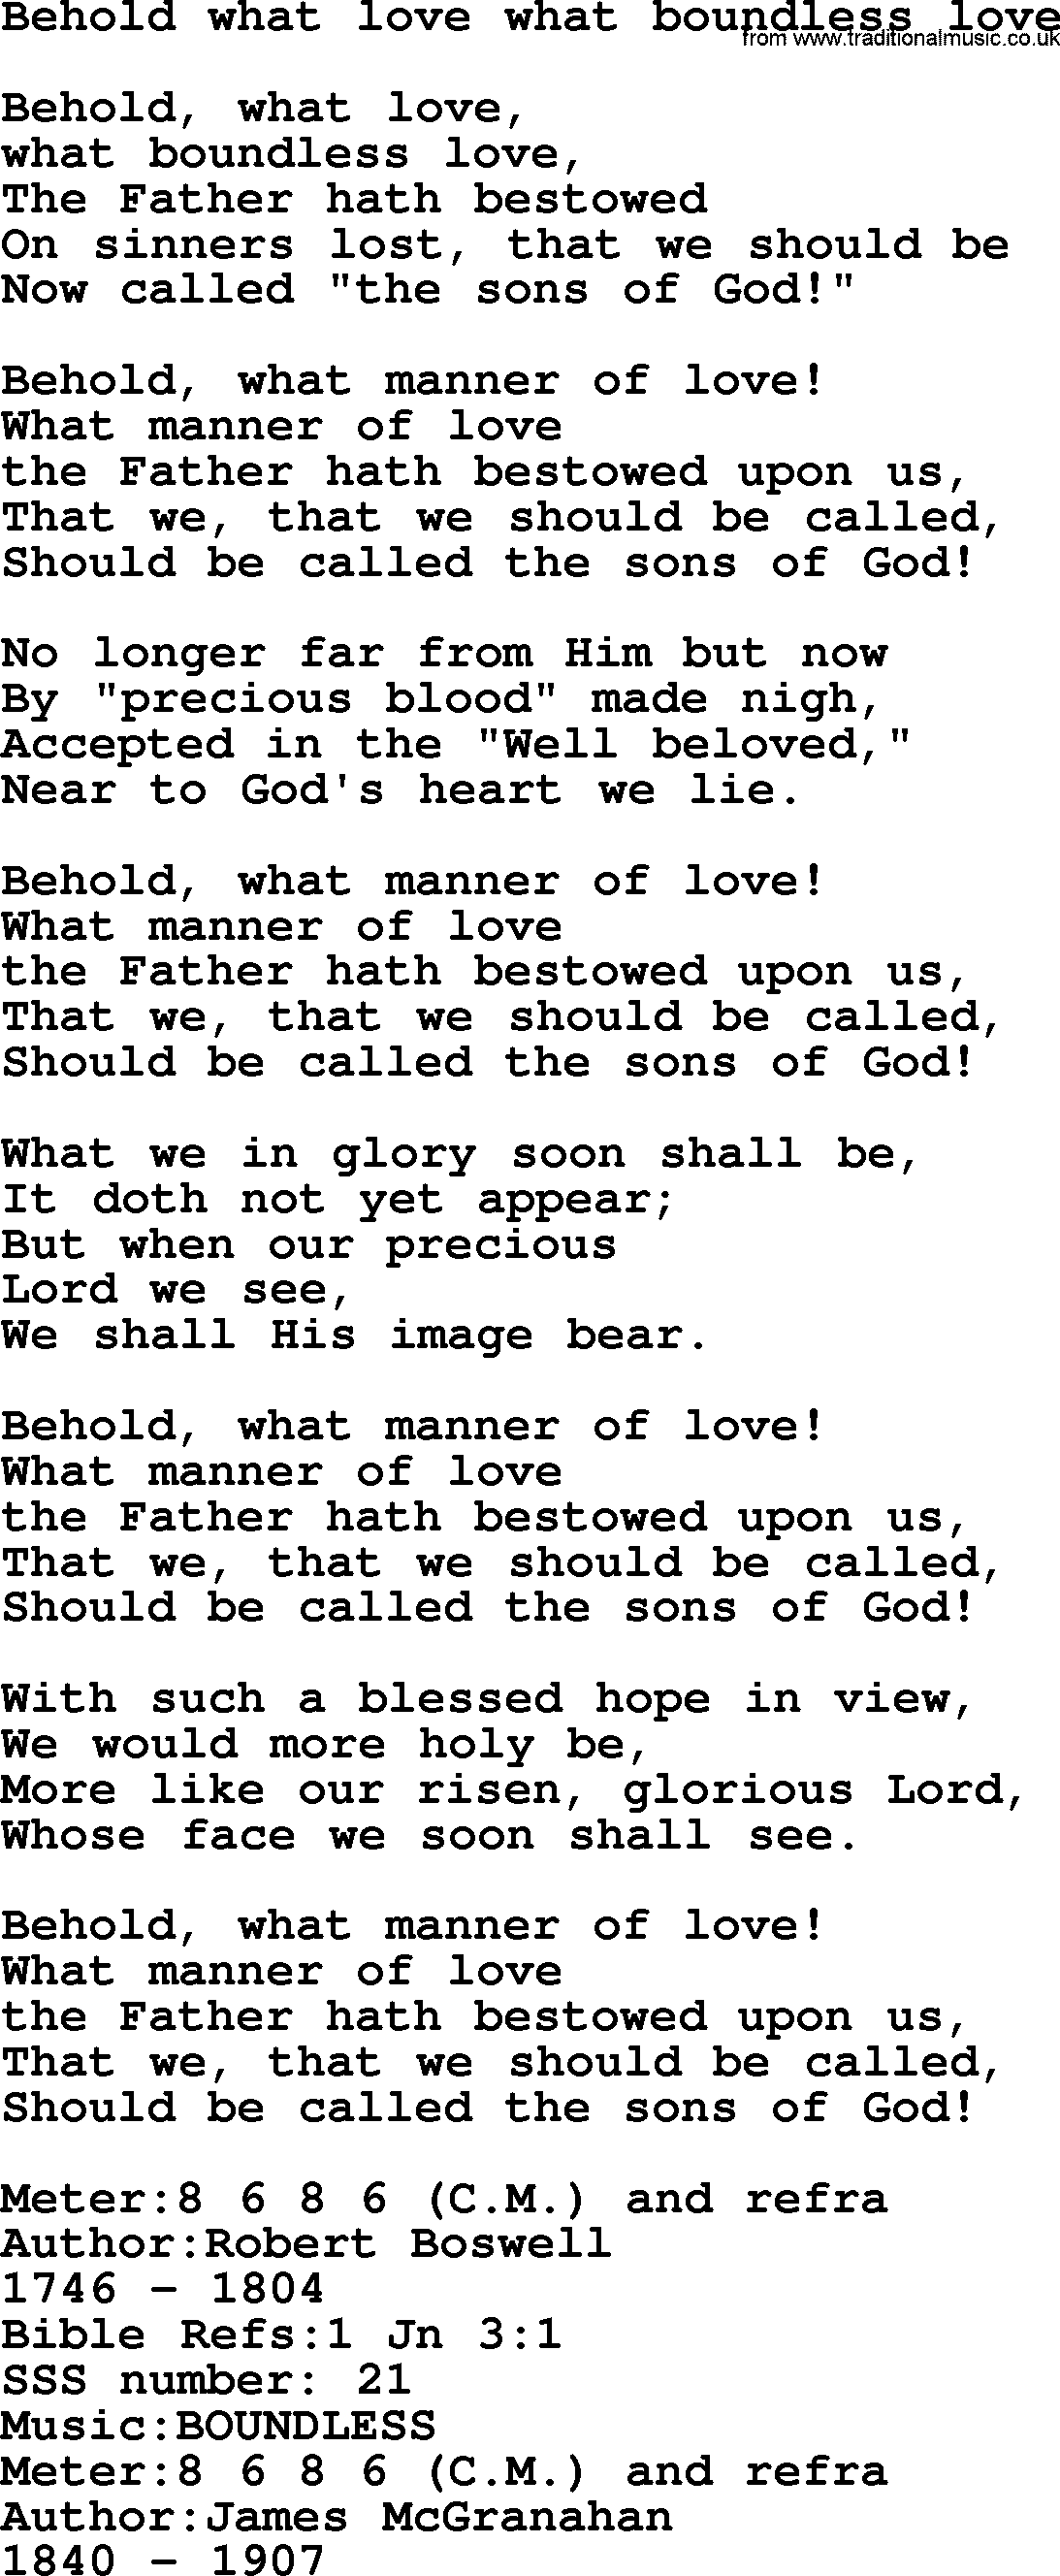 Sacred Songs and Solos complete, 1200 Hymns, title: Behold What Love What Boundless Love, lyrics and PDF